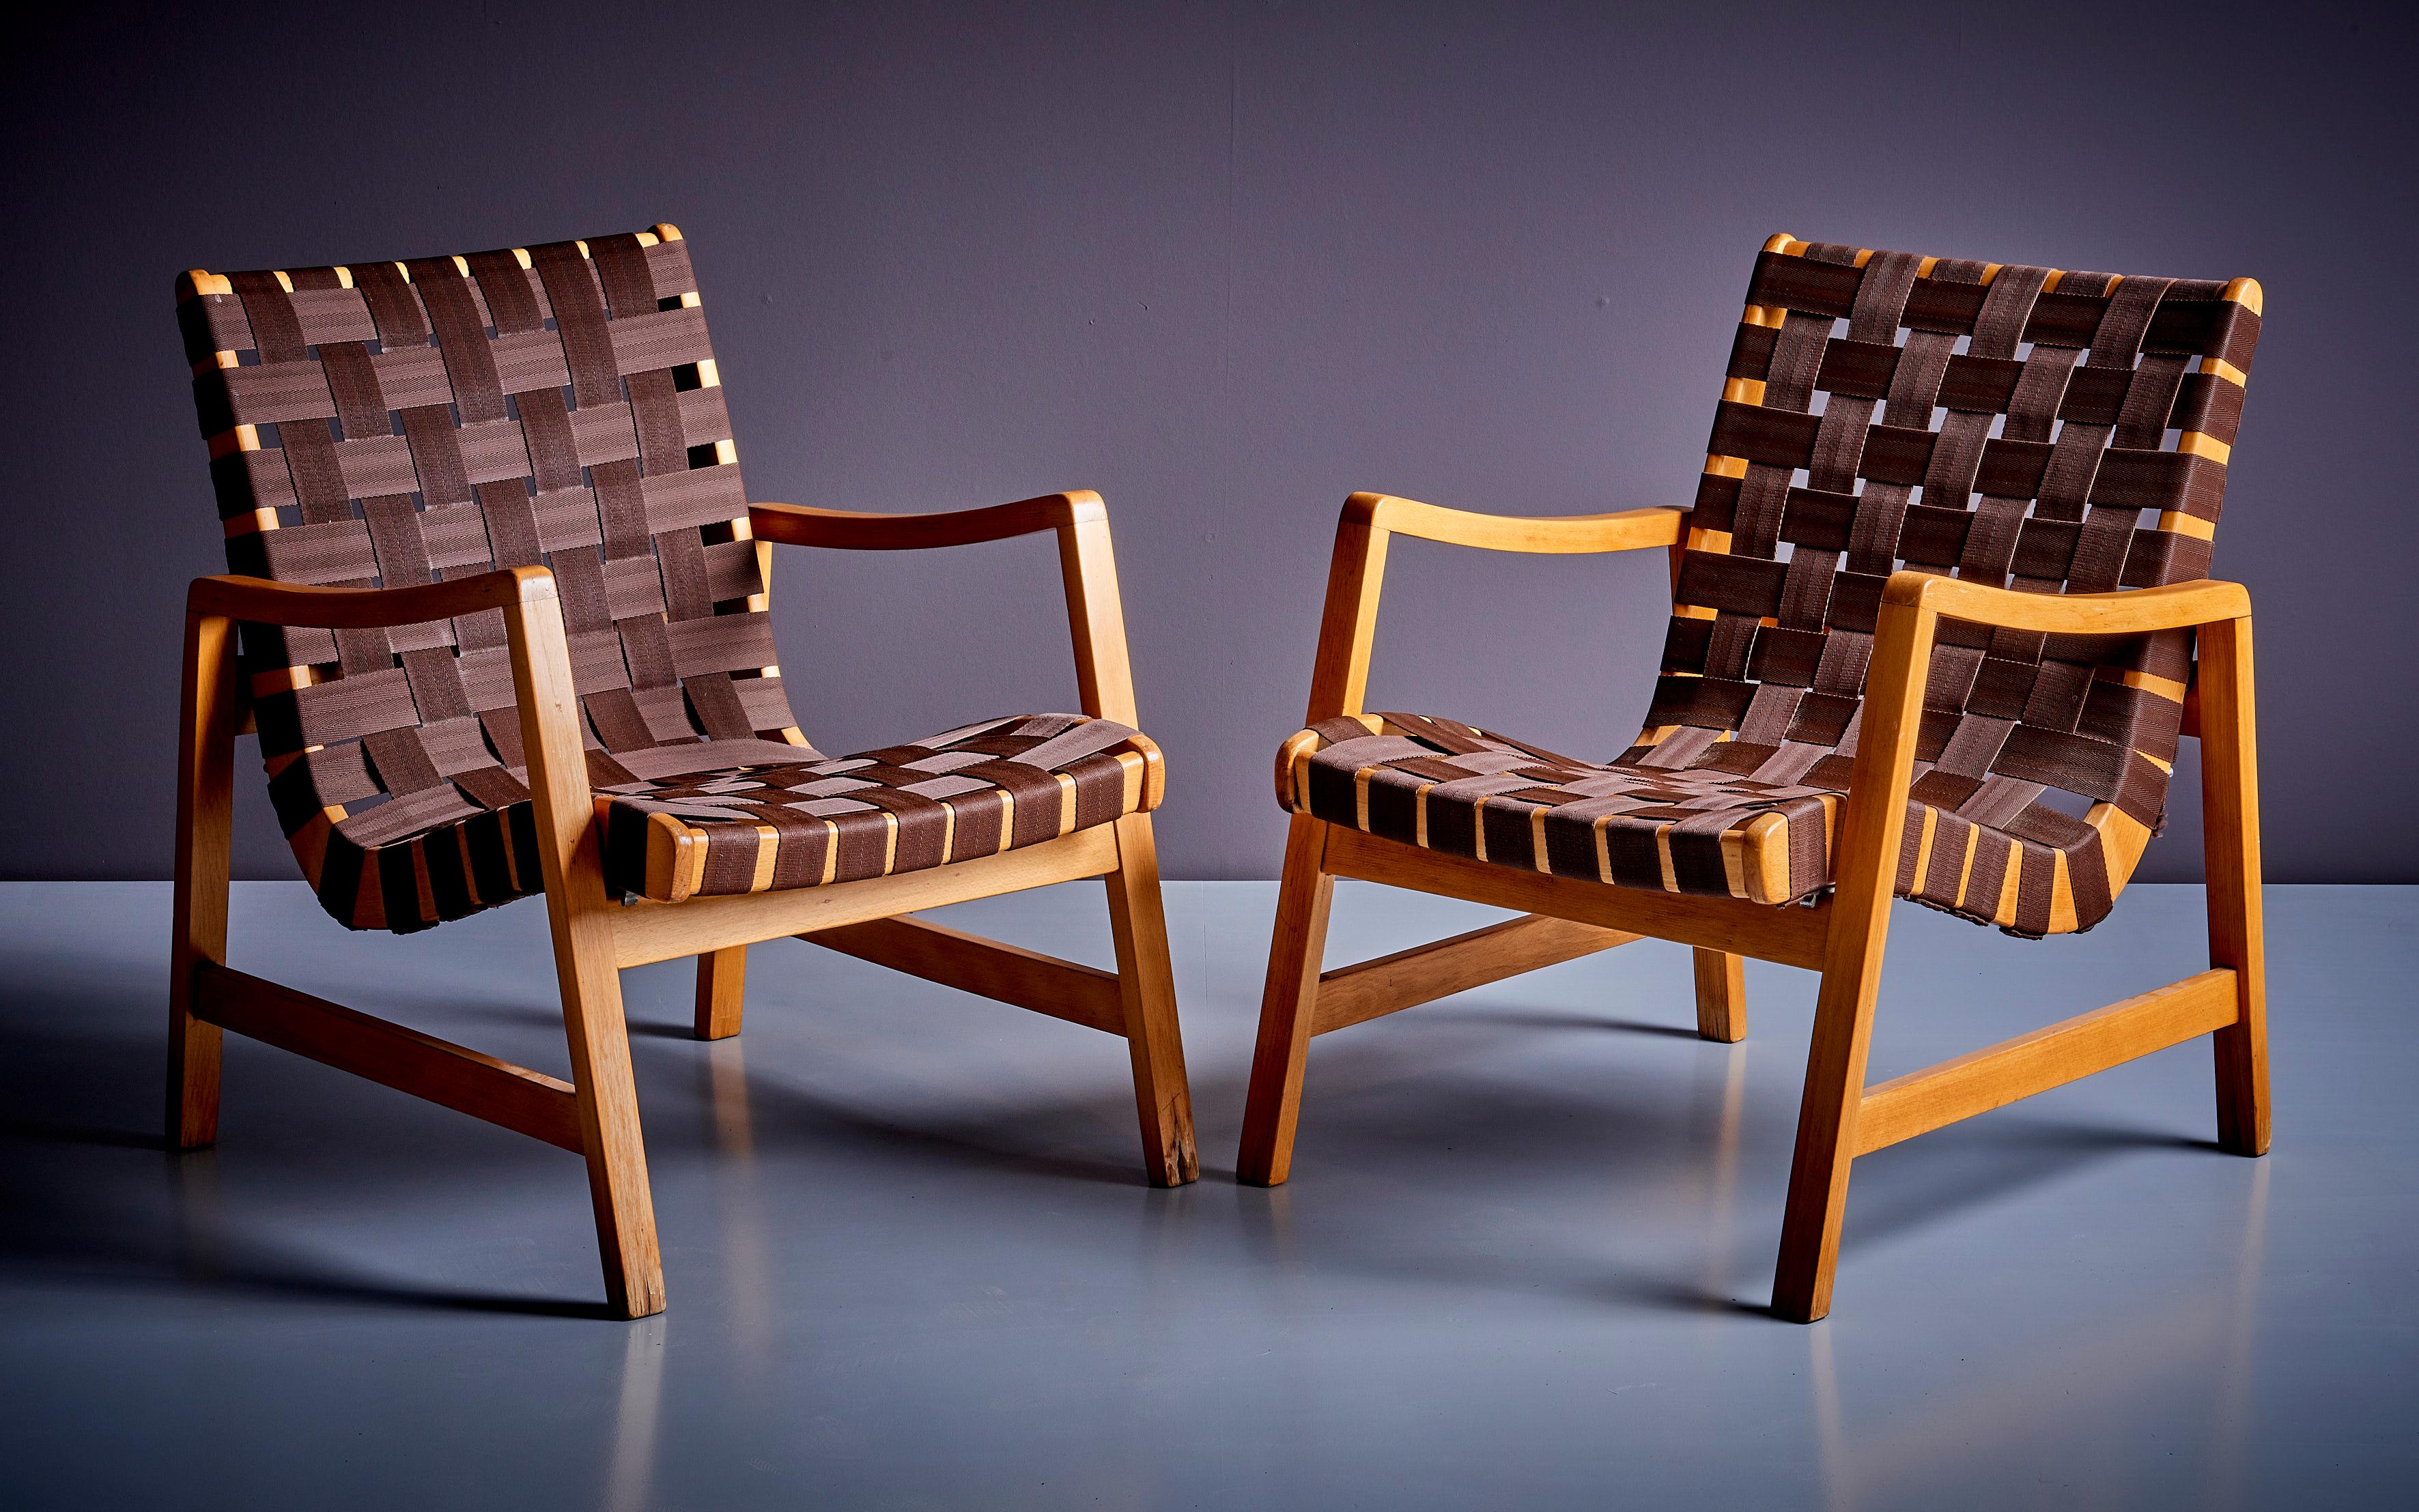 Pair of Jens Risom lounge chairs in brown webbing for Knoll. The seat is removable and adjustable from lounge to occasional chairs.